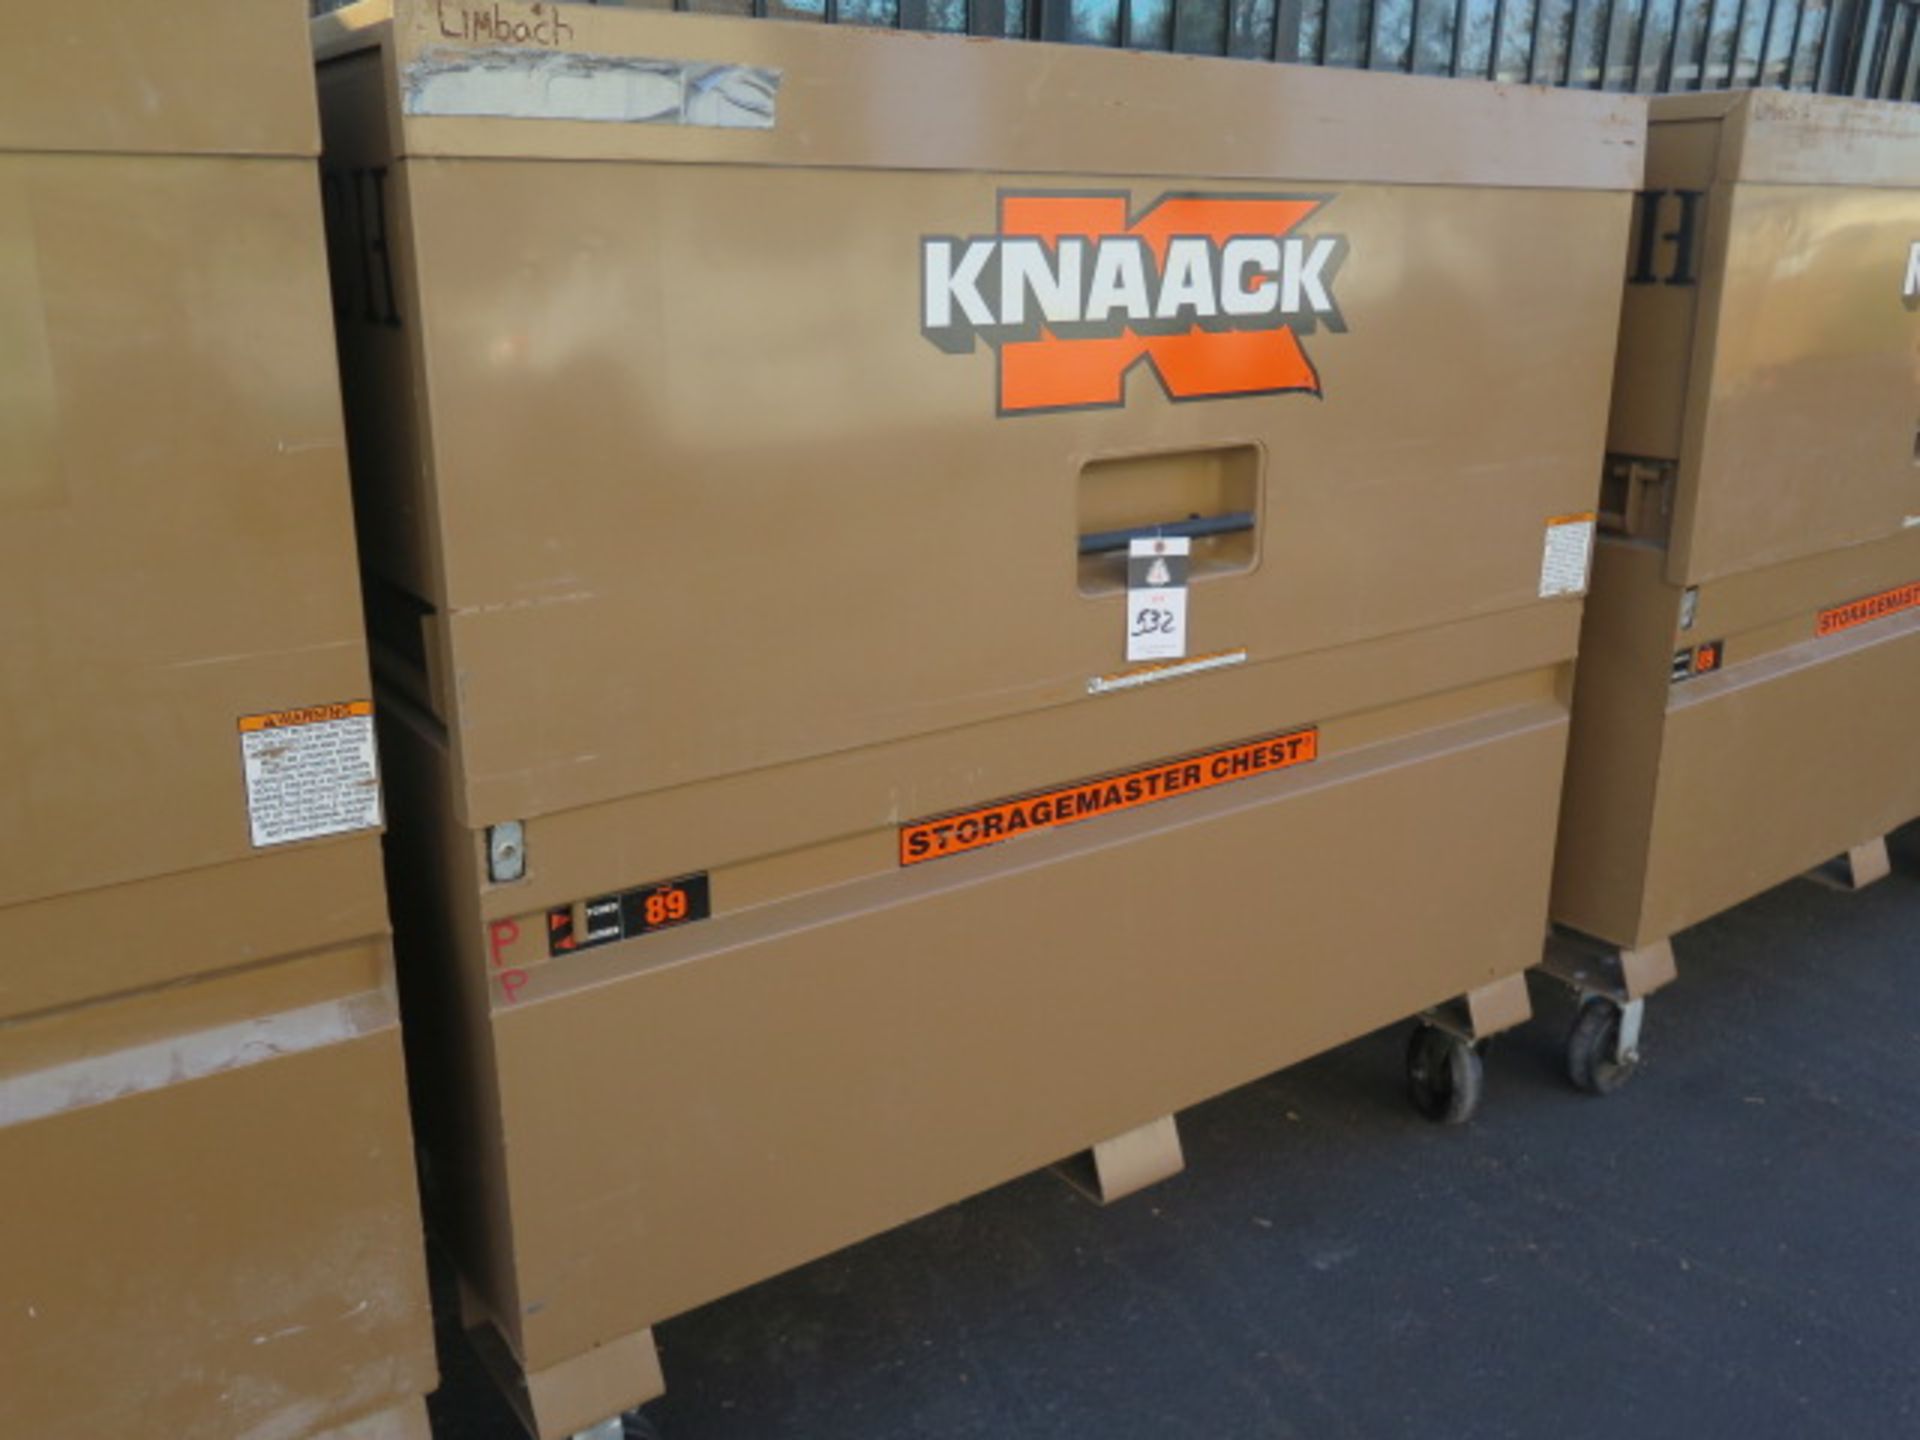 Knaack mdl. 89 "Storage Master" Rolling Job Box (SOLD AS-IS - NO WARRANTY) - Image 2 of 5